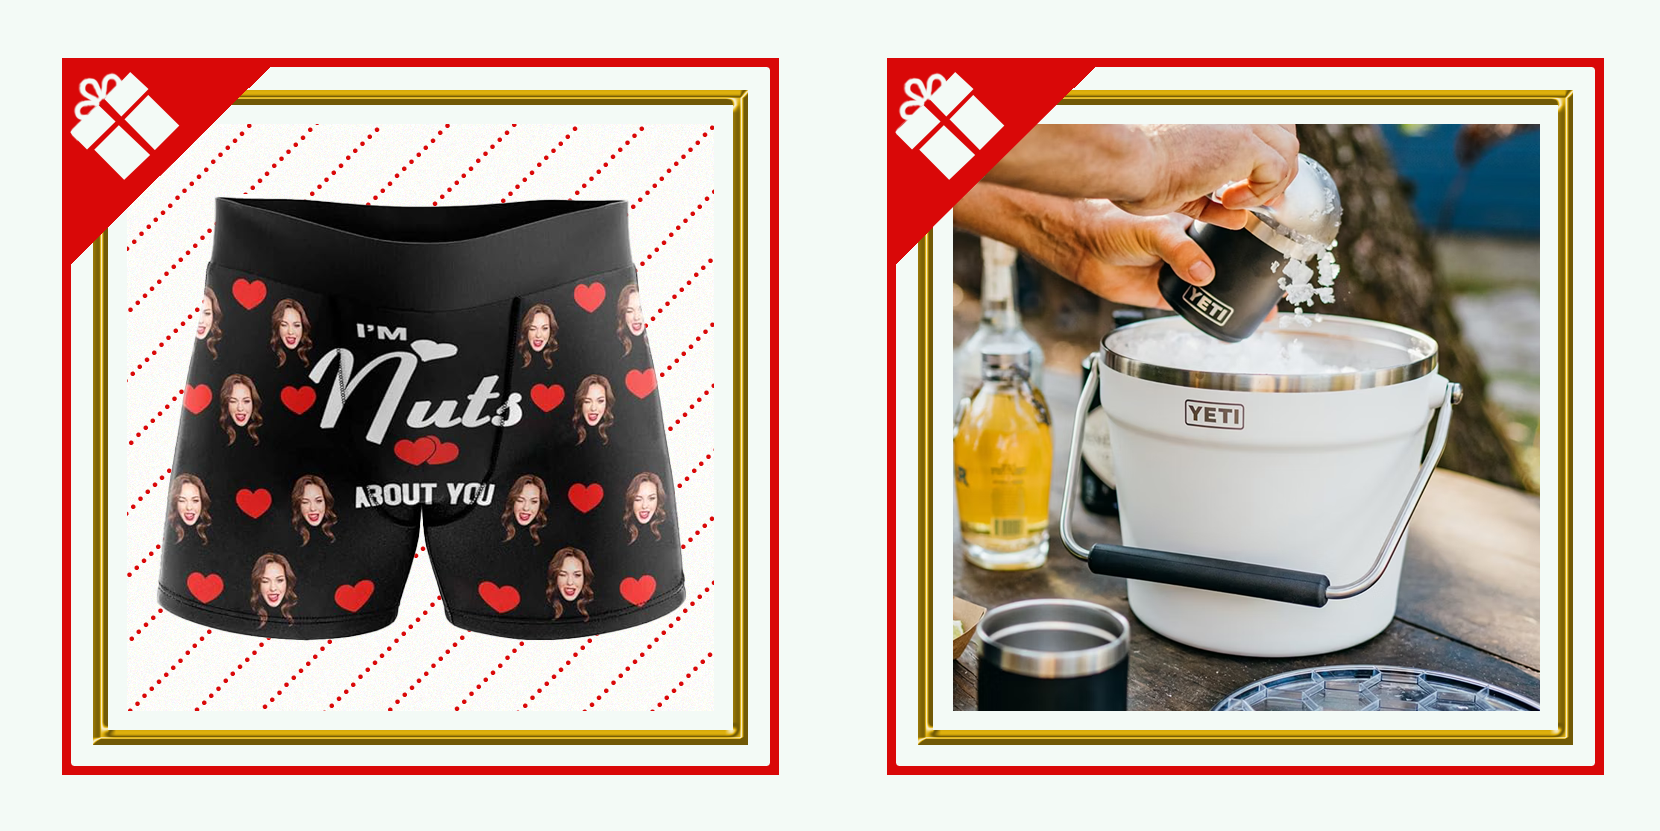  Valentines Day Gifts for Him,Gifts for Men,Valentines Day Gifts  Bulk,Valentines Day Gifts for Boyfriend,Birthday Gifts for Men,Gifts for  Boyfriend, Boyfriend Gifts,Long Distance Relationship Gifts : Home & Kitchen